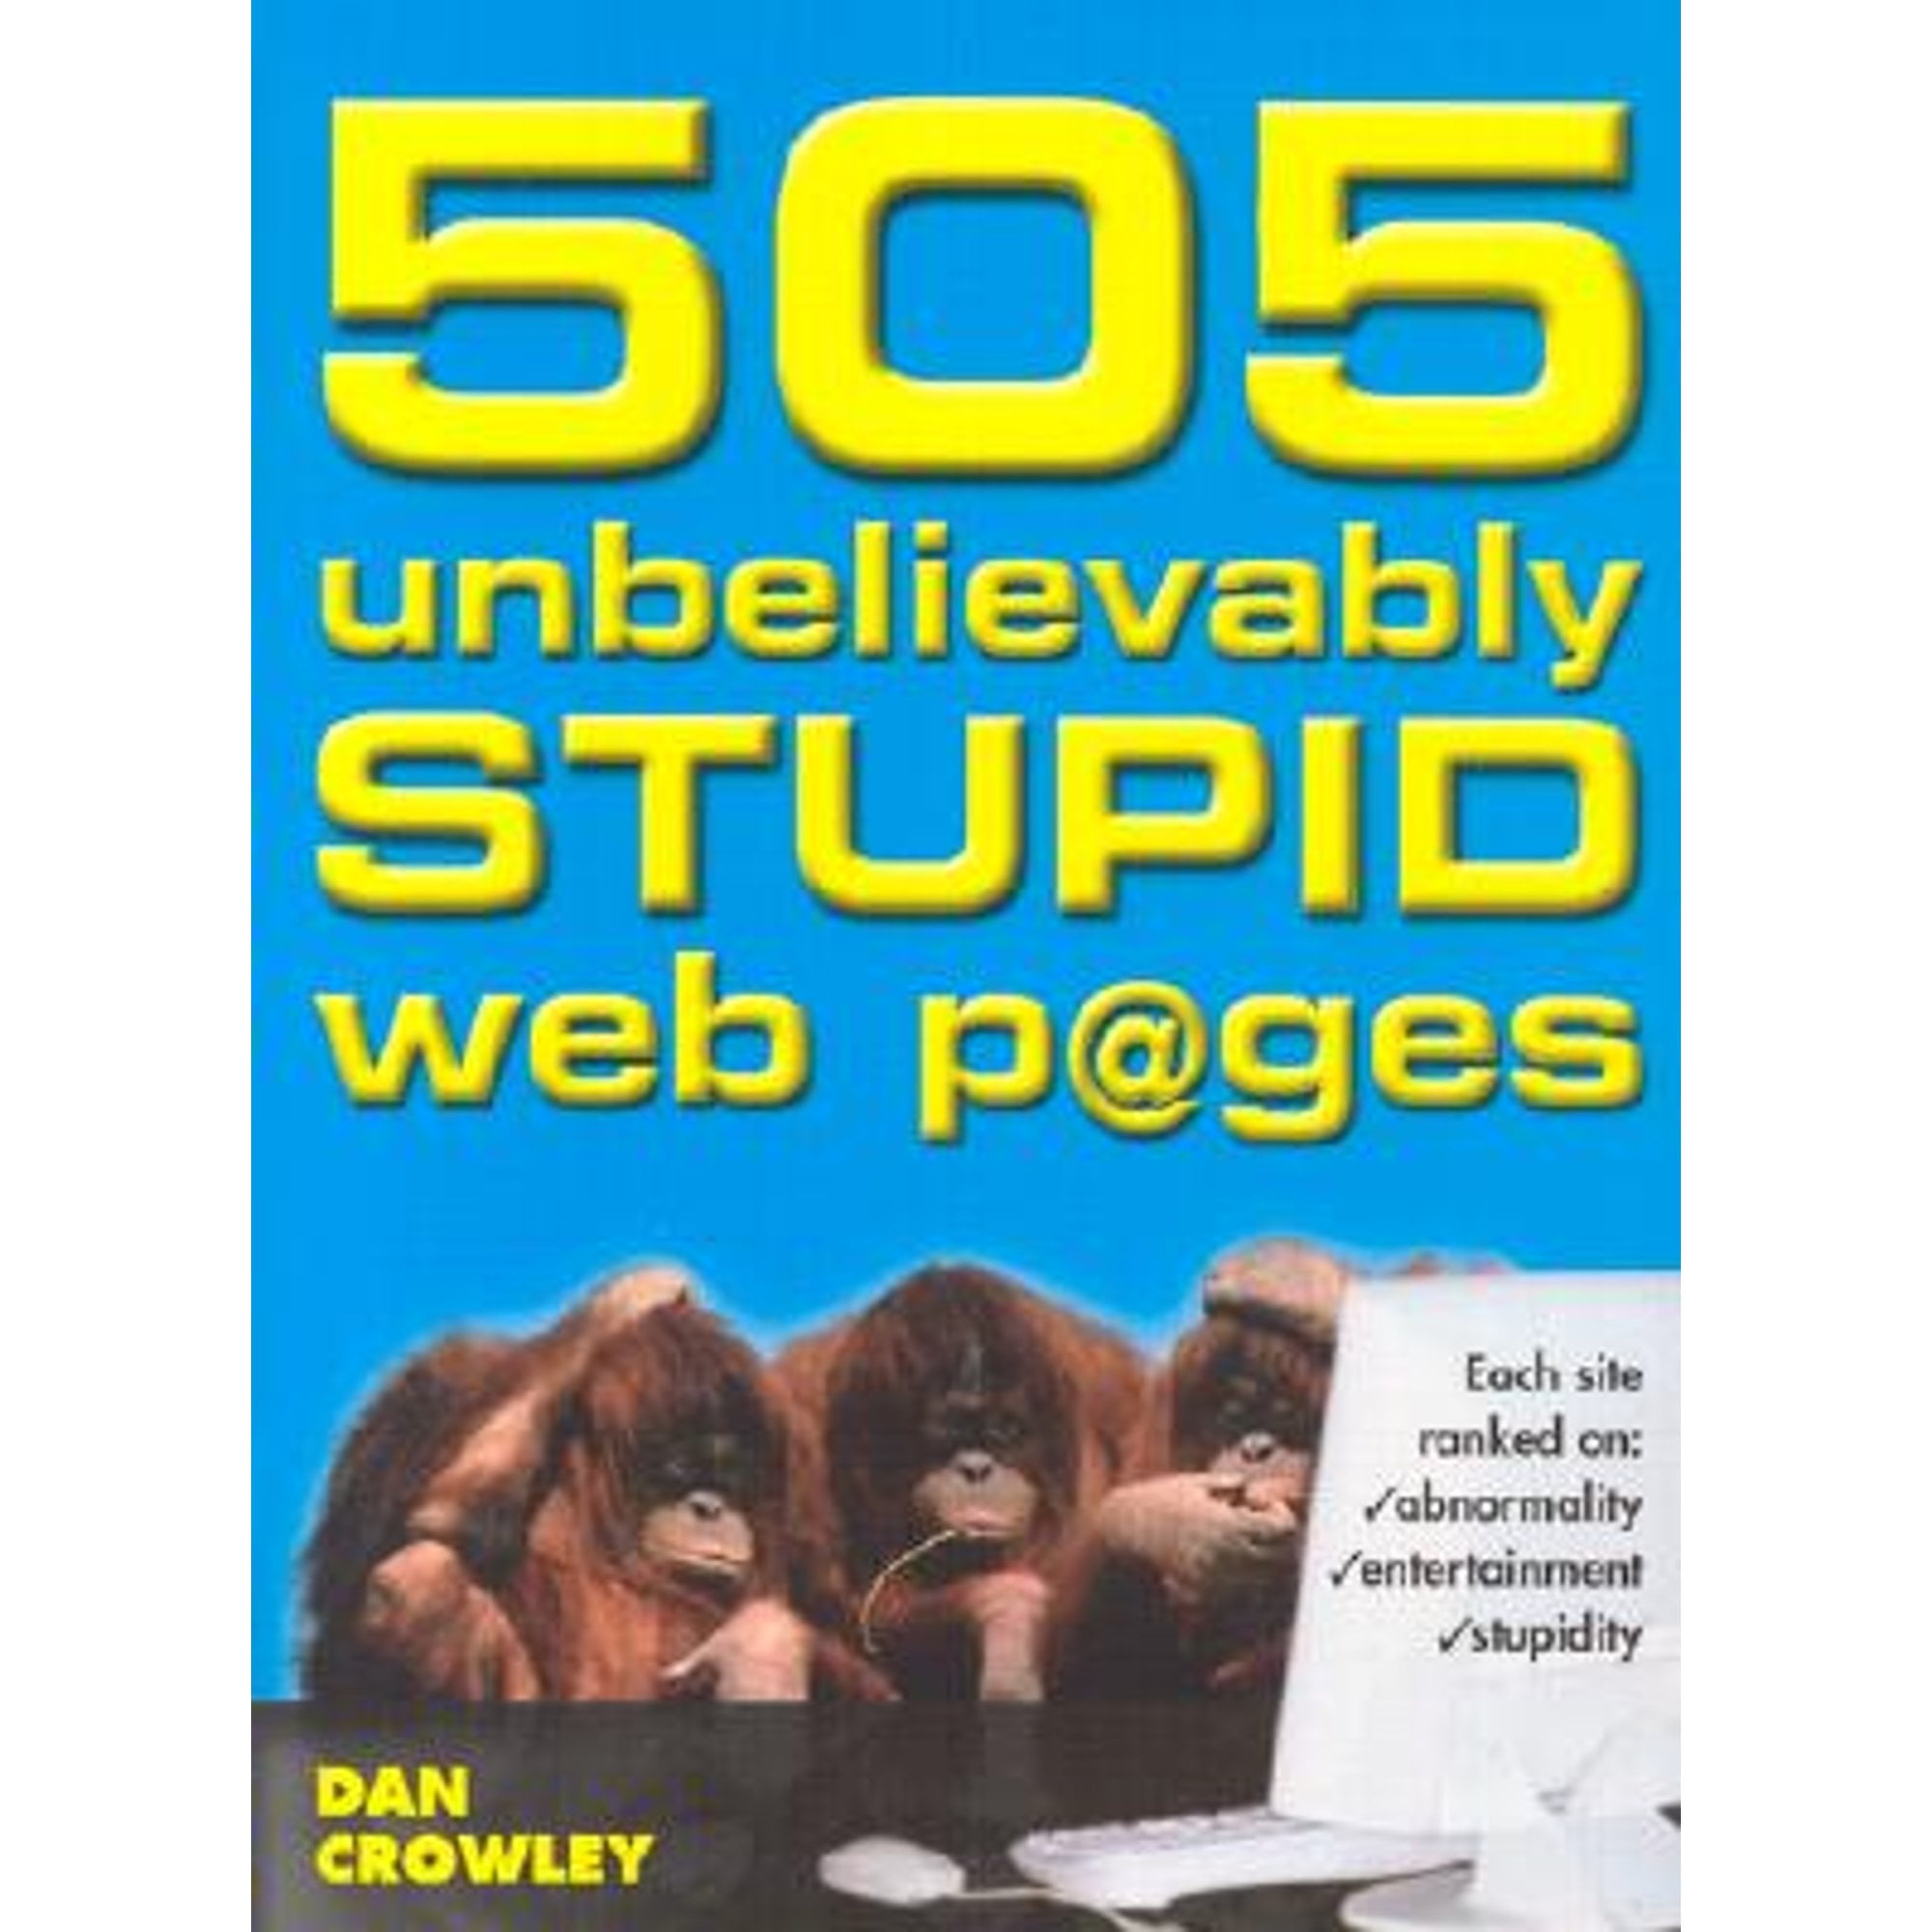 Pre-Owned 505 Unbelievably Stupid Web P@ges (Paperback 9781402201424) by Dan Crowley